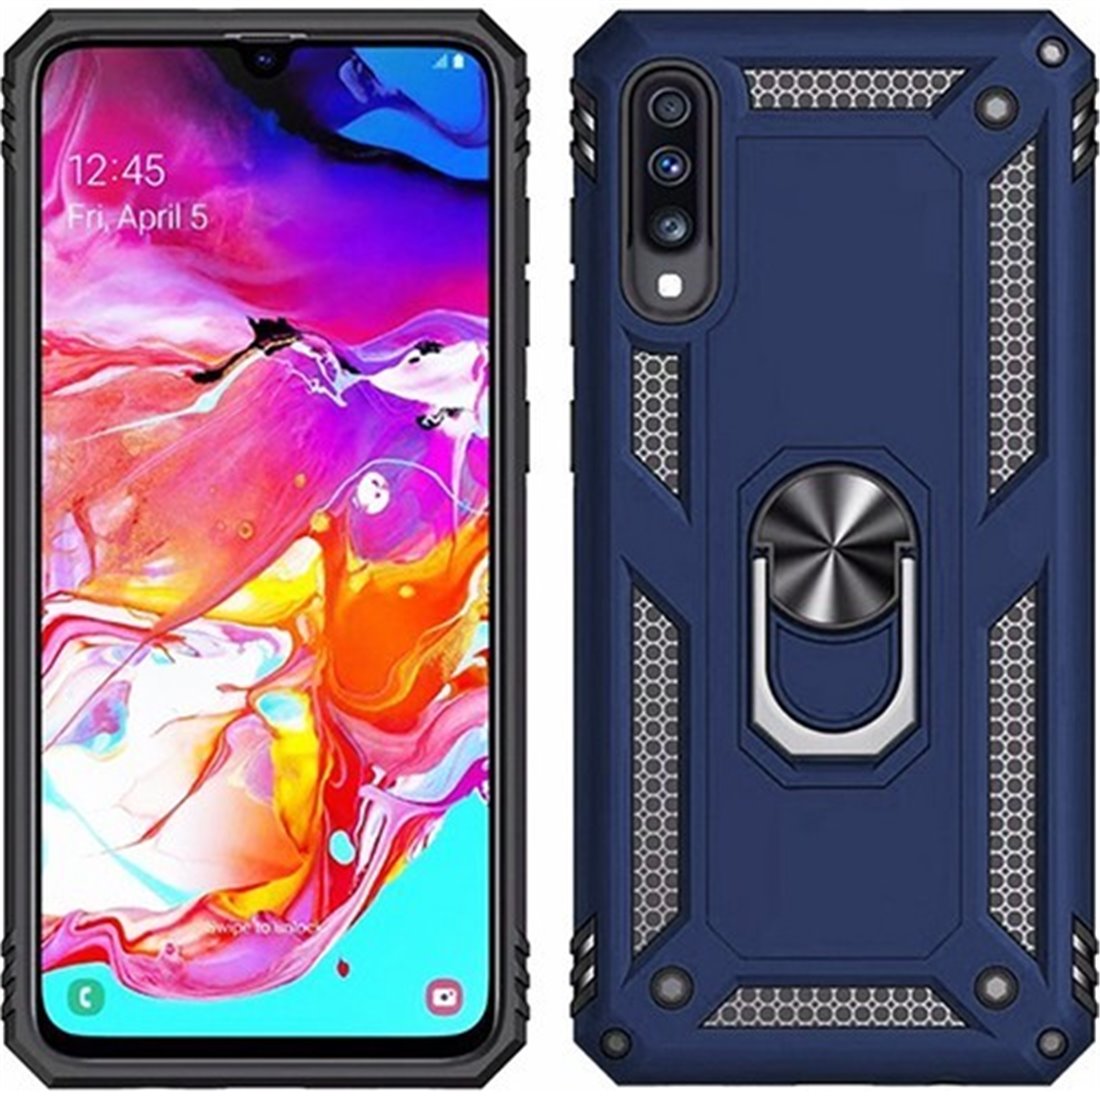 Samsung Galaxy A70 Plastic Blue Back Cover - Solid ring